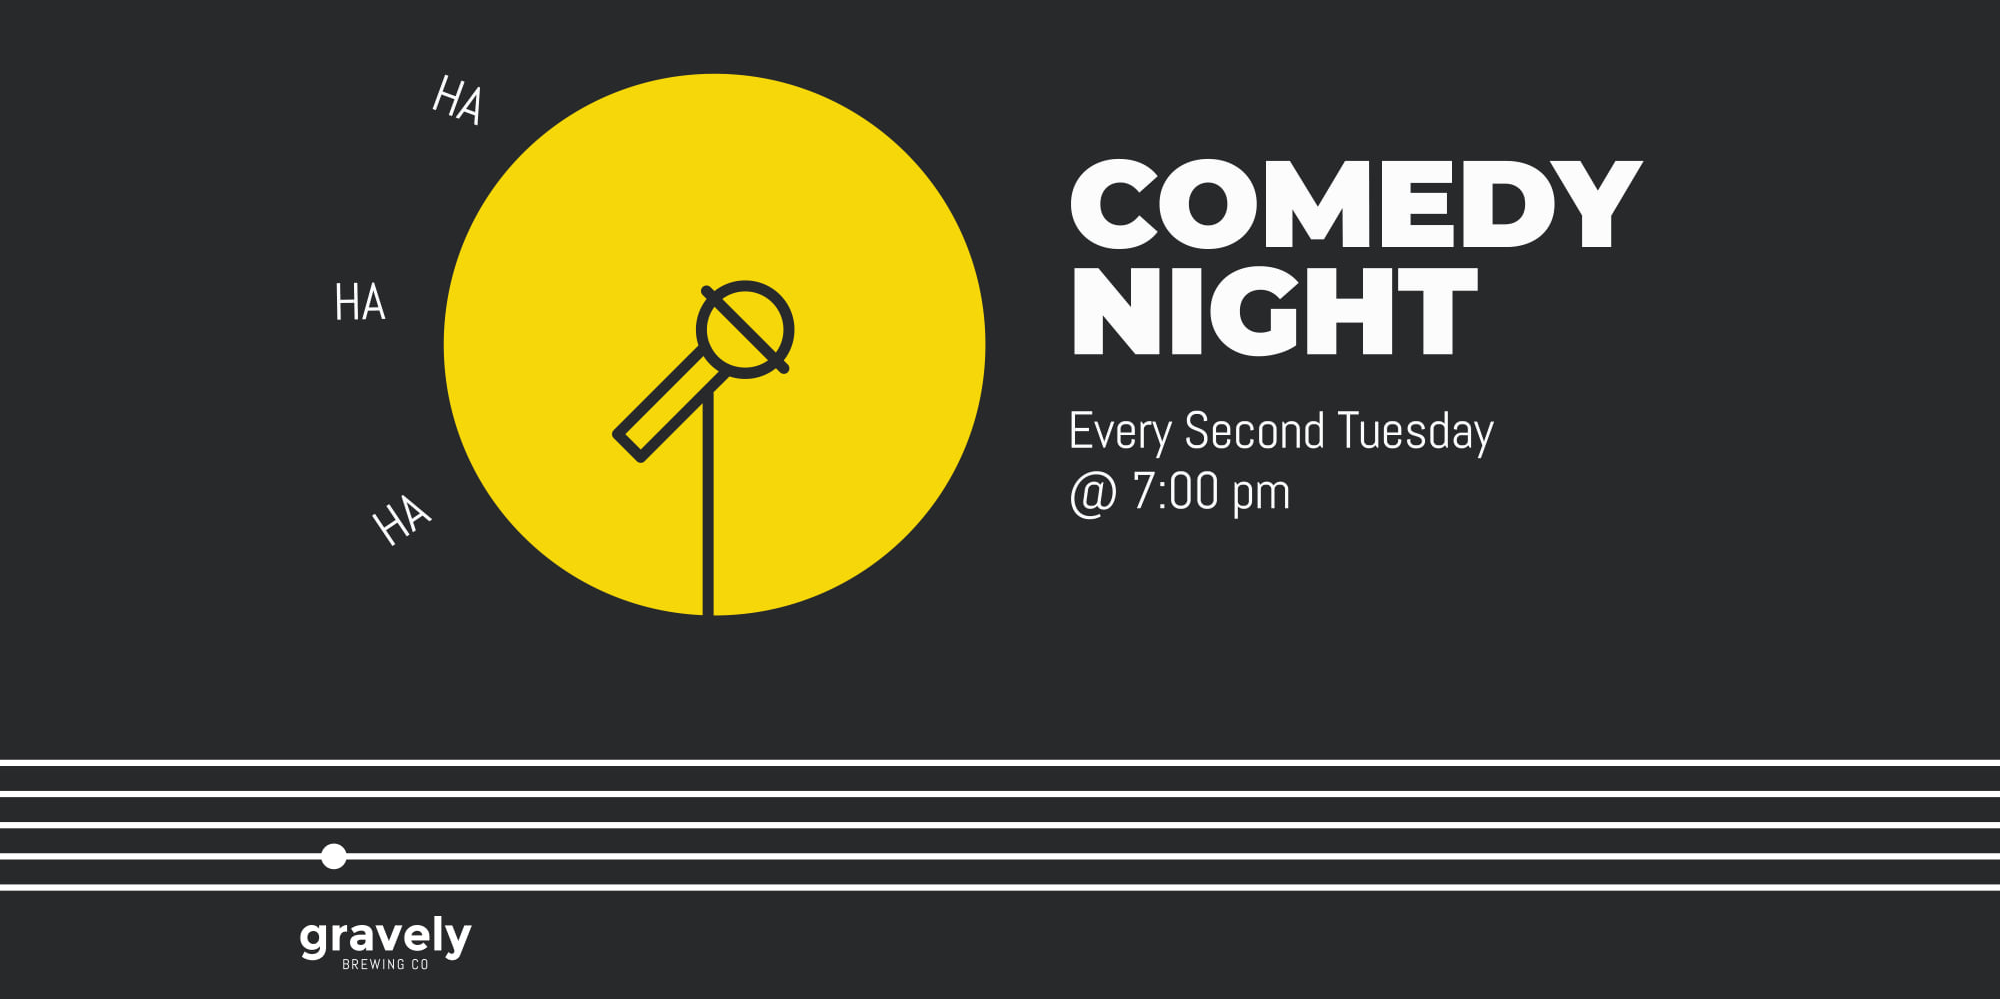 Comedy Night at Gravely Brewing Co promotional image